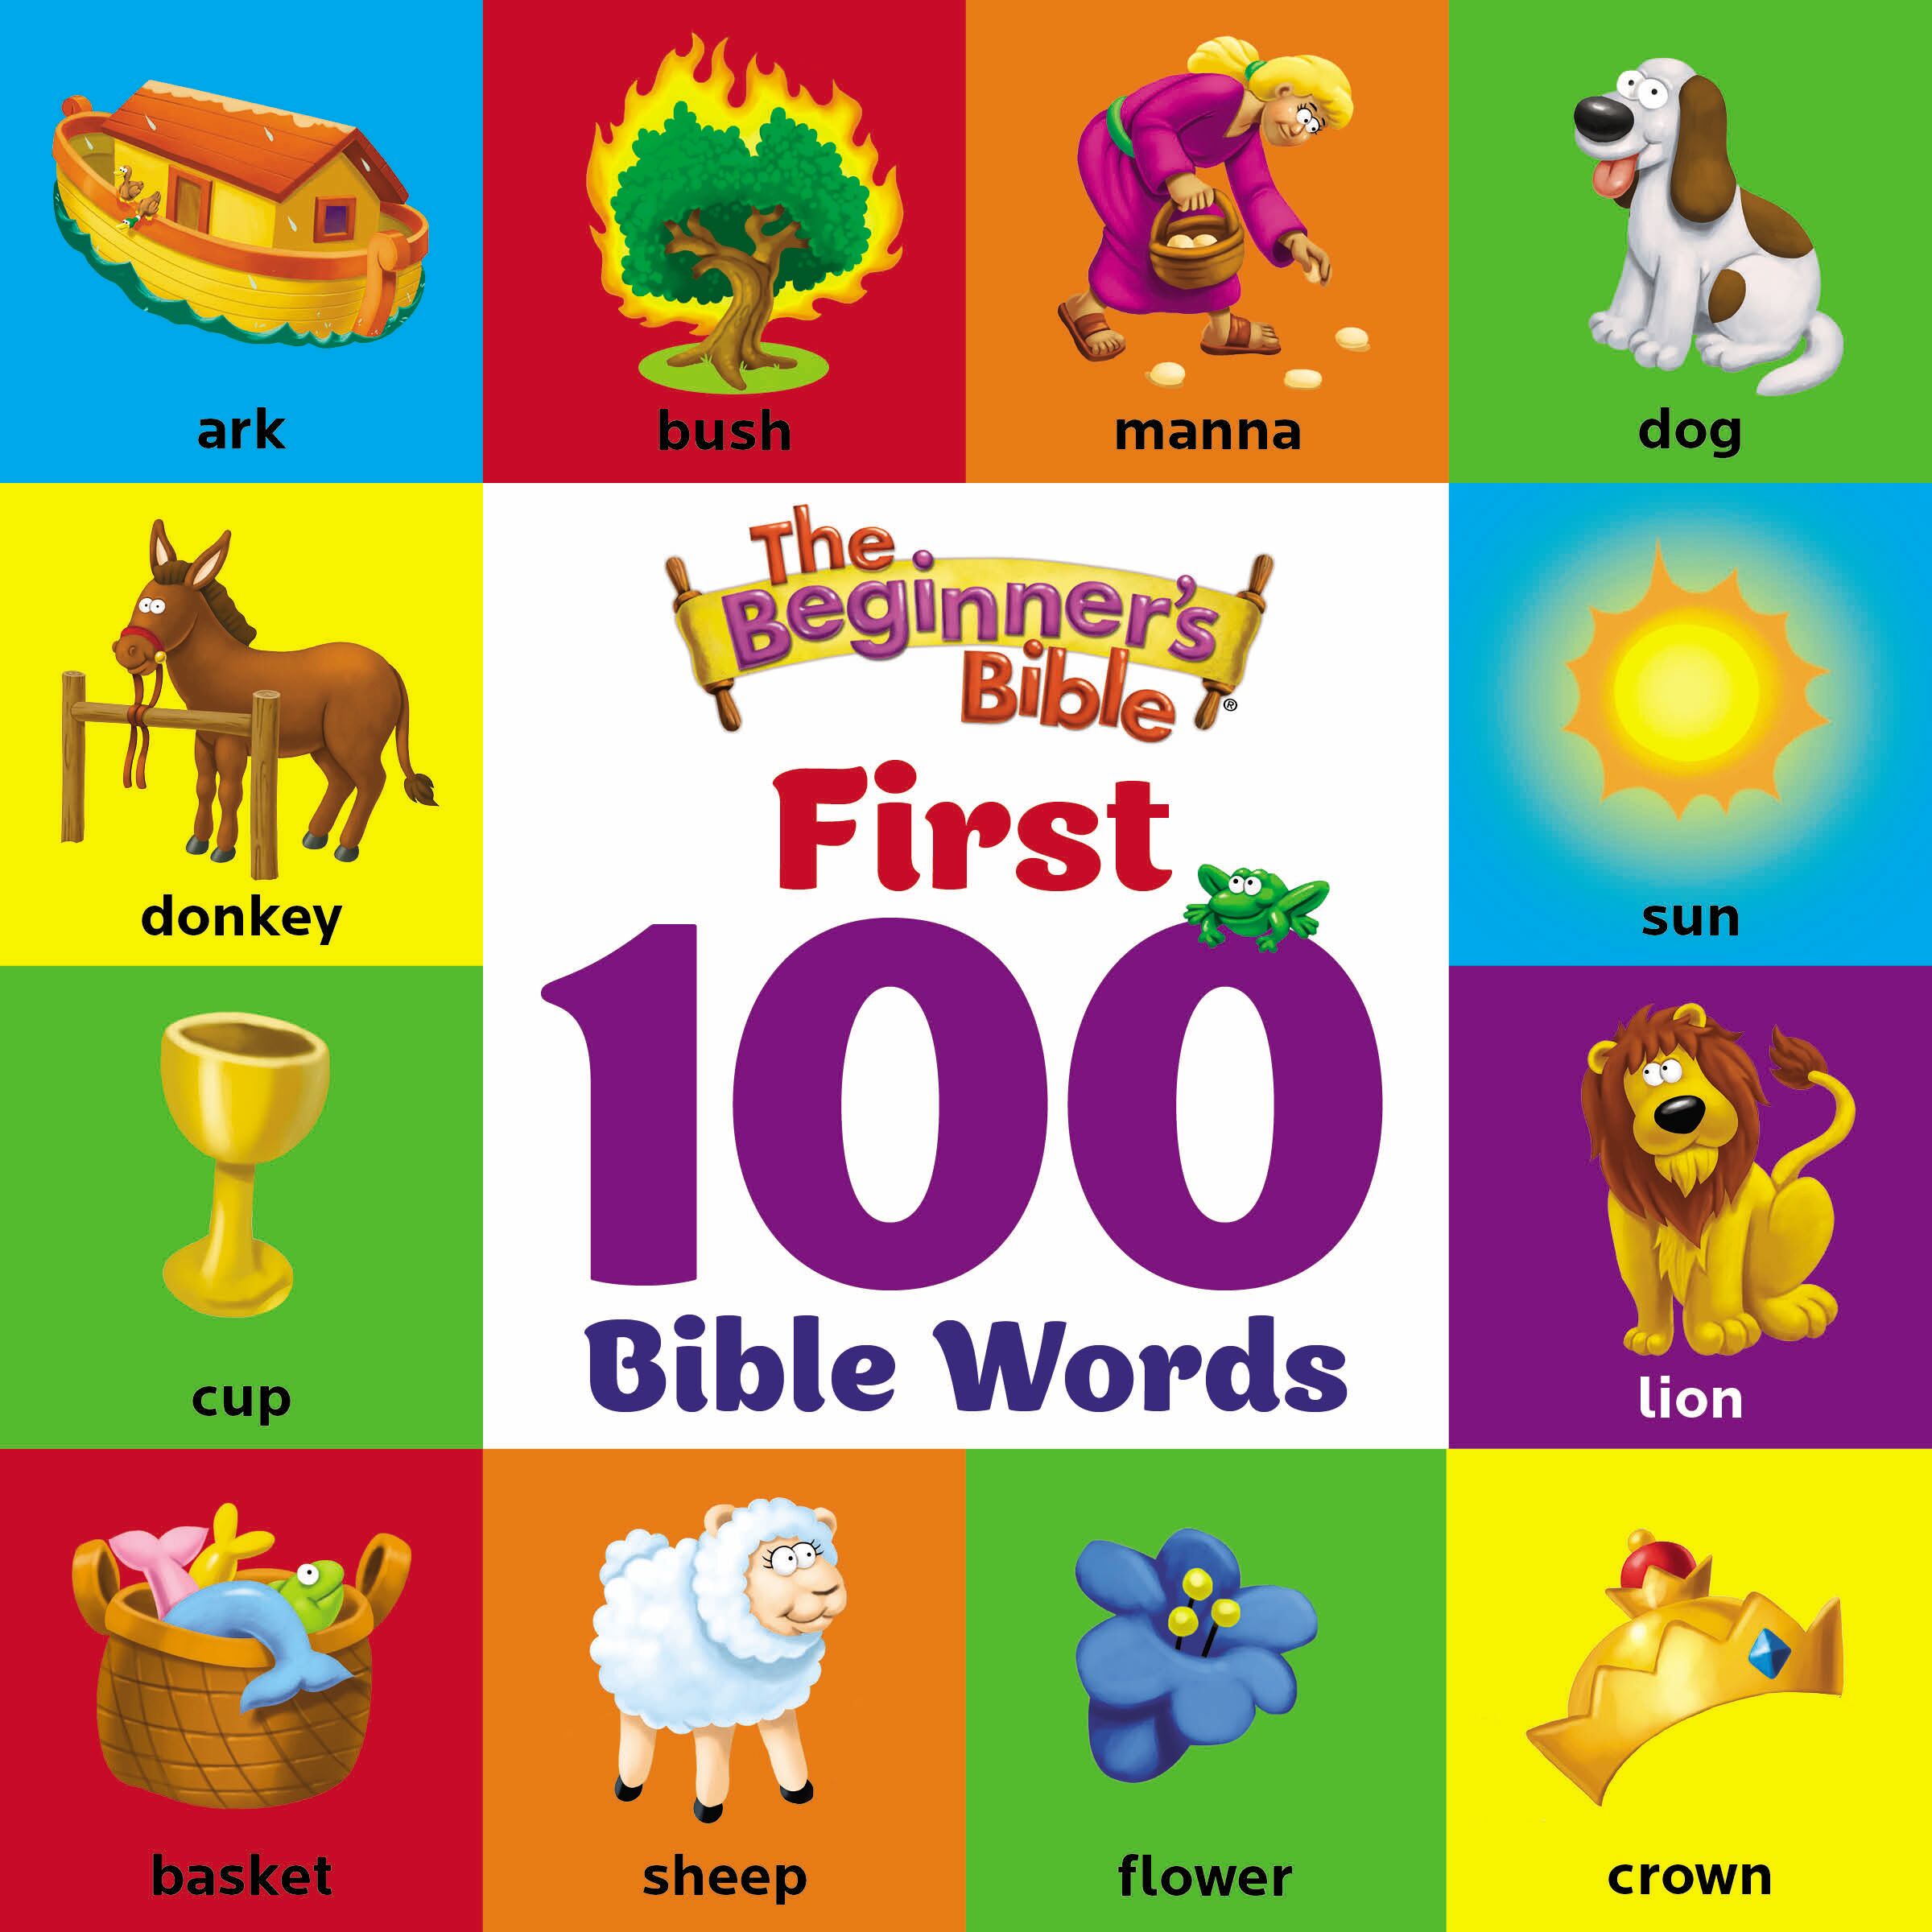 The Beginner’s Bible First 100 Bible Words cover